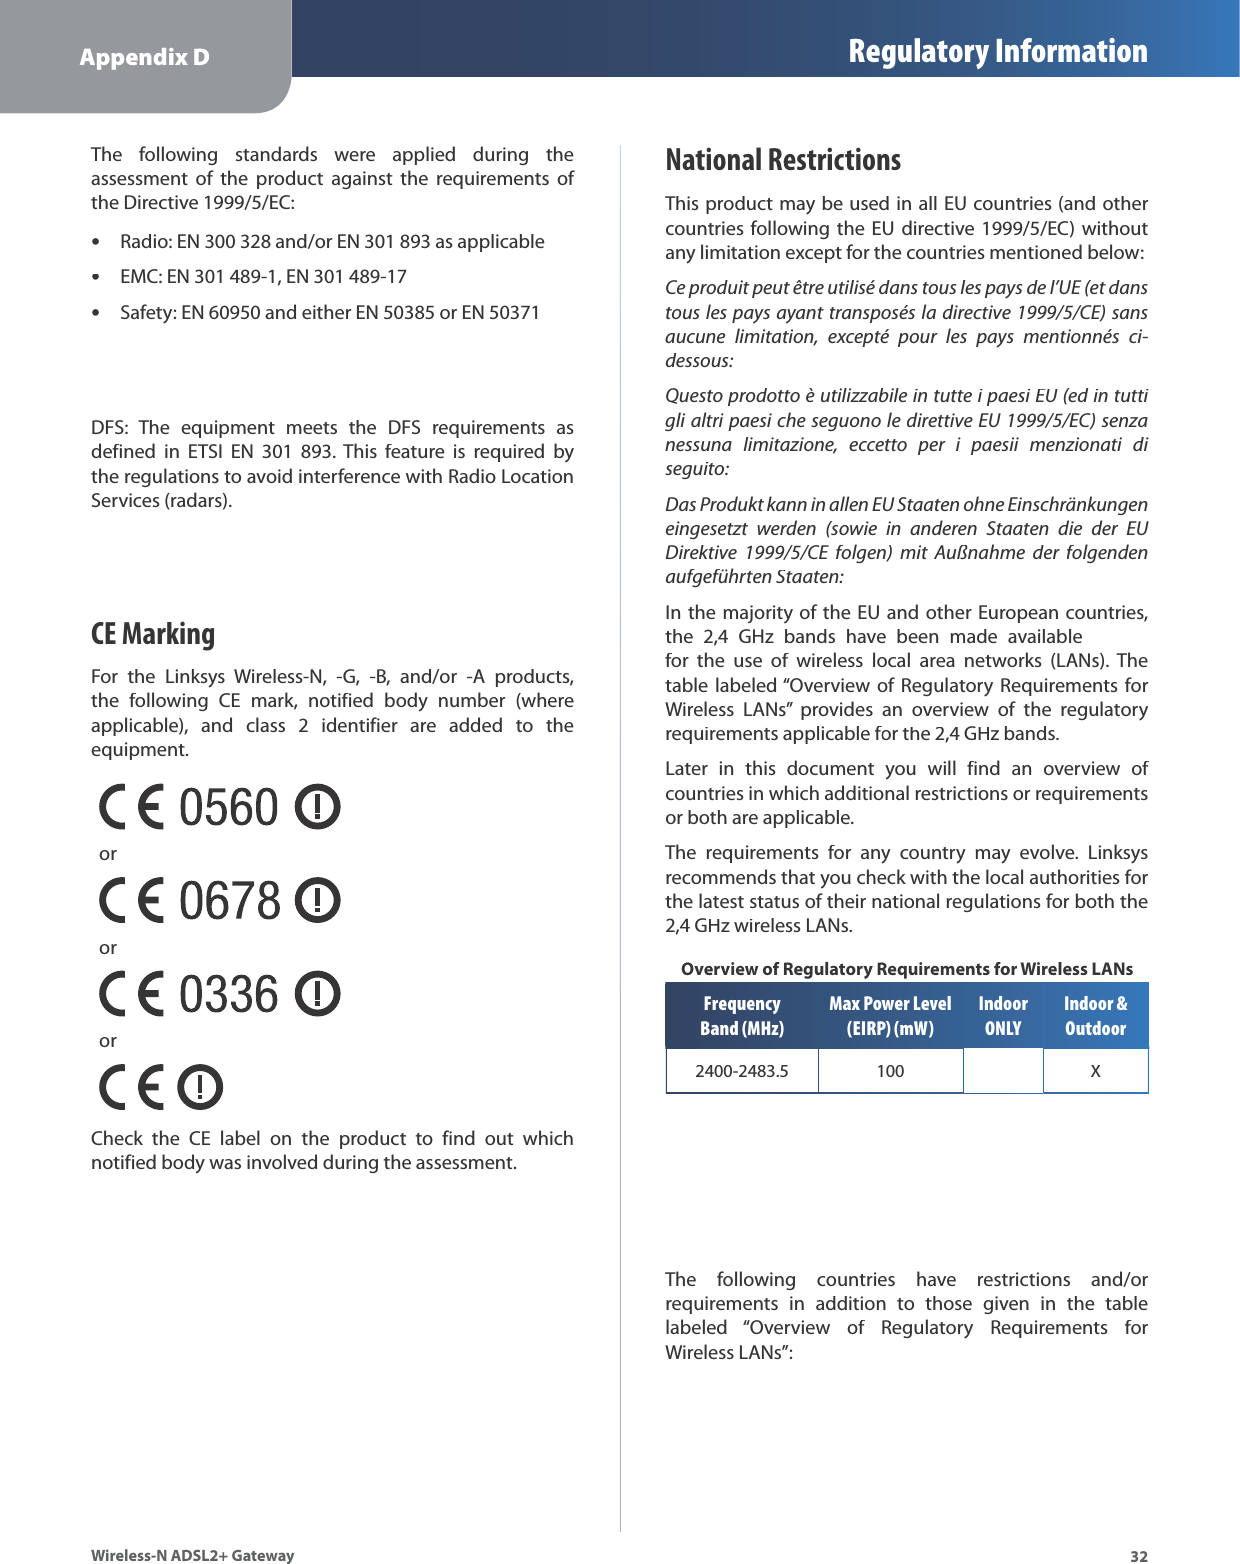 Appendix D Regulatory Information32Wireless-N ADSL2+ GatewayThe following standards were applied during the assessment of the product against the requirements of the Directive 1999/5/EC:Radio: EN 300 328 and/or EN 301 893 as applicableEMC: EN 301 489-1, EN 301 489-17Safety: EN 60950 and either EN 50385 or EN 50371DFS: The equipment meets the DFS requirements as defined in ETSI EN 301 893. This feature is required by the regulations to avoid interference with Radio Location Services (radars).CE MarkingFor the Linksys Wireless-N, -G, -B, and/or -A products,the following CE mark, notified body number (whereapplicable), and class 2 identifier are added to the equipment.orororCheck the CE label on the product to find out which notified body was involved during the assessment.•••National RestrictionsThis product may be used in all EU countries (and other countries following the EU directive 1999/5/EC) without any limitation except for the countries mentioned below:Ceproduitpeutêtreutilisédanstouslespaysdel’UE(etdanstouslespaysayanttransposésladirective1999/5/CE)sansaucunelimitation,exceptépourlespaysmentionnésci-dessous:QuestoprodottoèutilizzabileintutteipaesiEU(edintuttiglialtripaesicheseguonoledirettiveEU1999/5/EC)senzanessunalimitazione,eccettoperipaesiimenzionatidiseguito:DasProduktkanninallenEUStaatenohneEinschränkungeneingesetztwerden(sowieinanderenStaatendiederEUDirektive1999/5/CEfolgen)mitAußnahmederfolgendenaufgeführtenStaaten:In the majority of the EU and other European countries, the 2,4GHz bands have been made availablefor the use of wireless local area networks (LANs). The table labeled “Overview of Regulatory Requirements forWireless LANs” provides an overview of the regulatory requirements applicablefor the 2,4ff GHz bands.Later in this document you will find an overview of countries in which additional restrictions or requirements or both are applicable.The requirements for any country may evolve. Linksysrecommends that you check with the local authorities for the latest status of their national regulations for both the 2,4 GHz wireless LANs.Overview of Regulatory Requirements for Wireless LANsFrequency Band (MHz)Max Power Level (EIRP) (mW)IndoorONLYIndoor &amp; Outdoor2400-2483.5100XThe following countries have restrictions and/orrequirements in addition to those given in the table labeled “Overview of Regulatory Requirements forWireless LANs”: